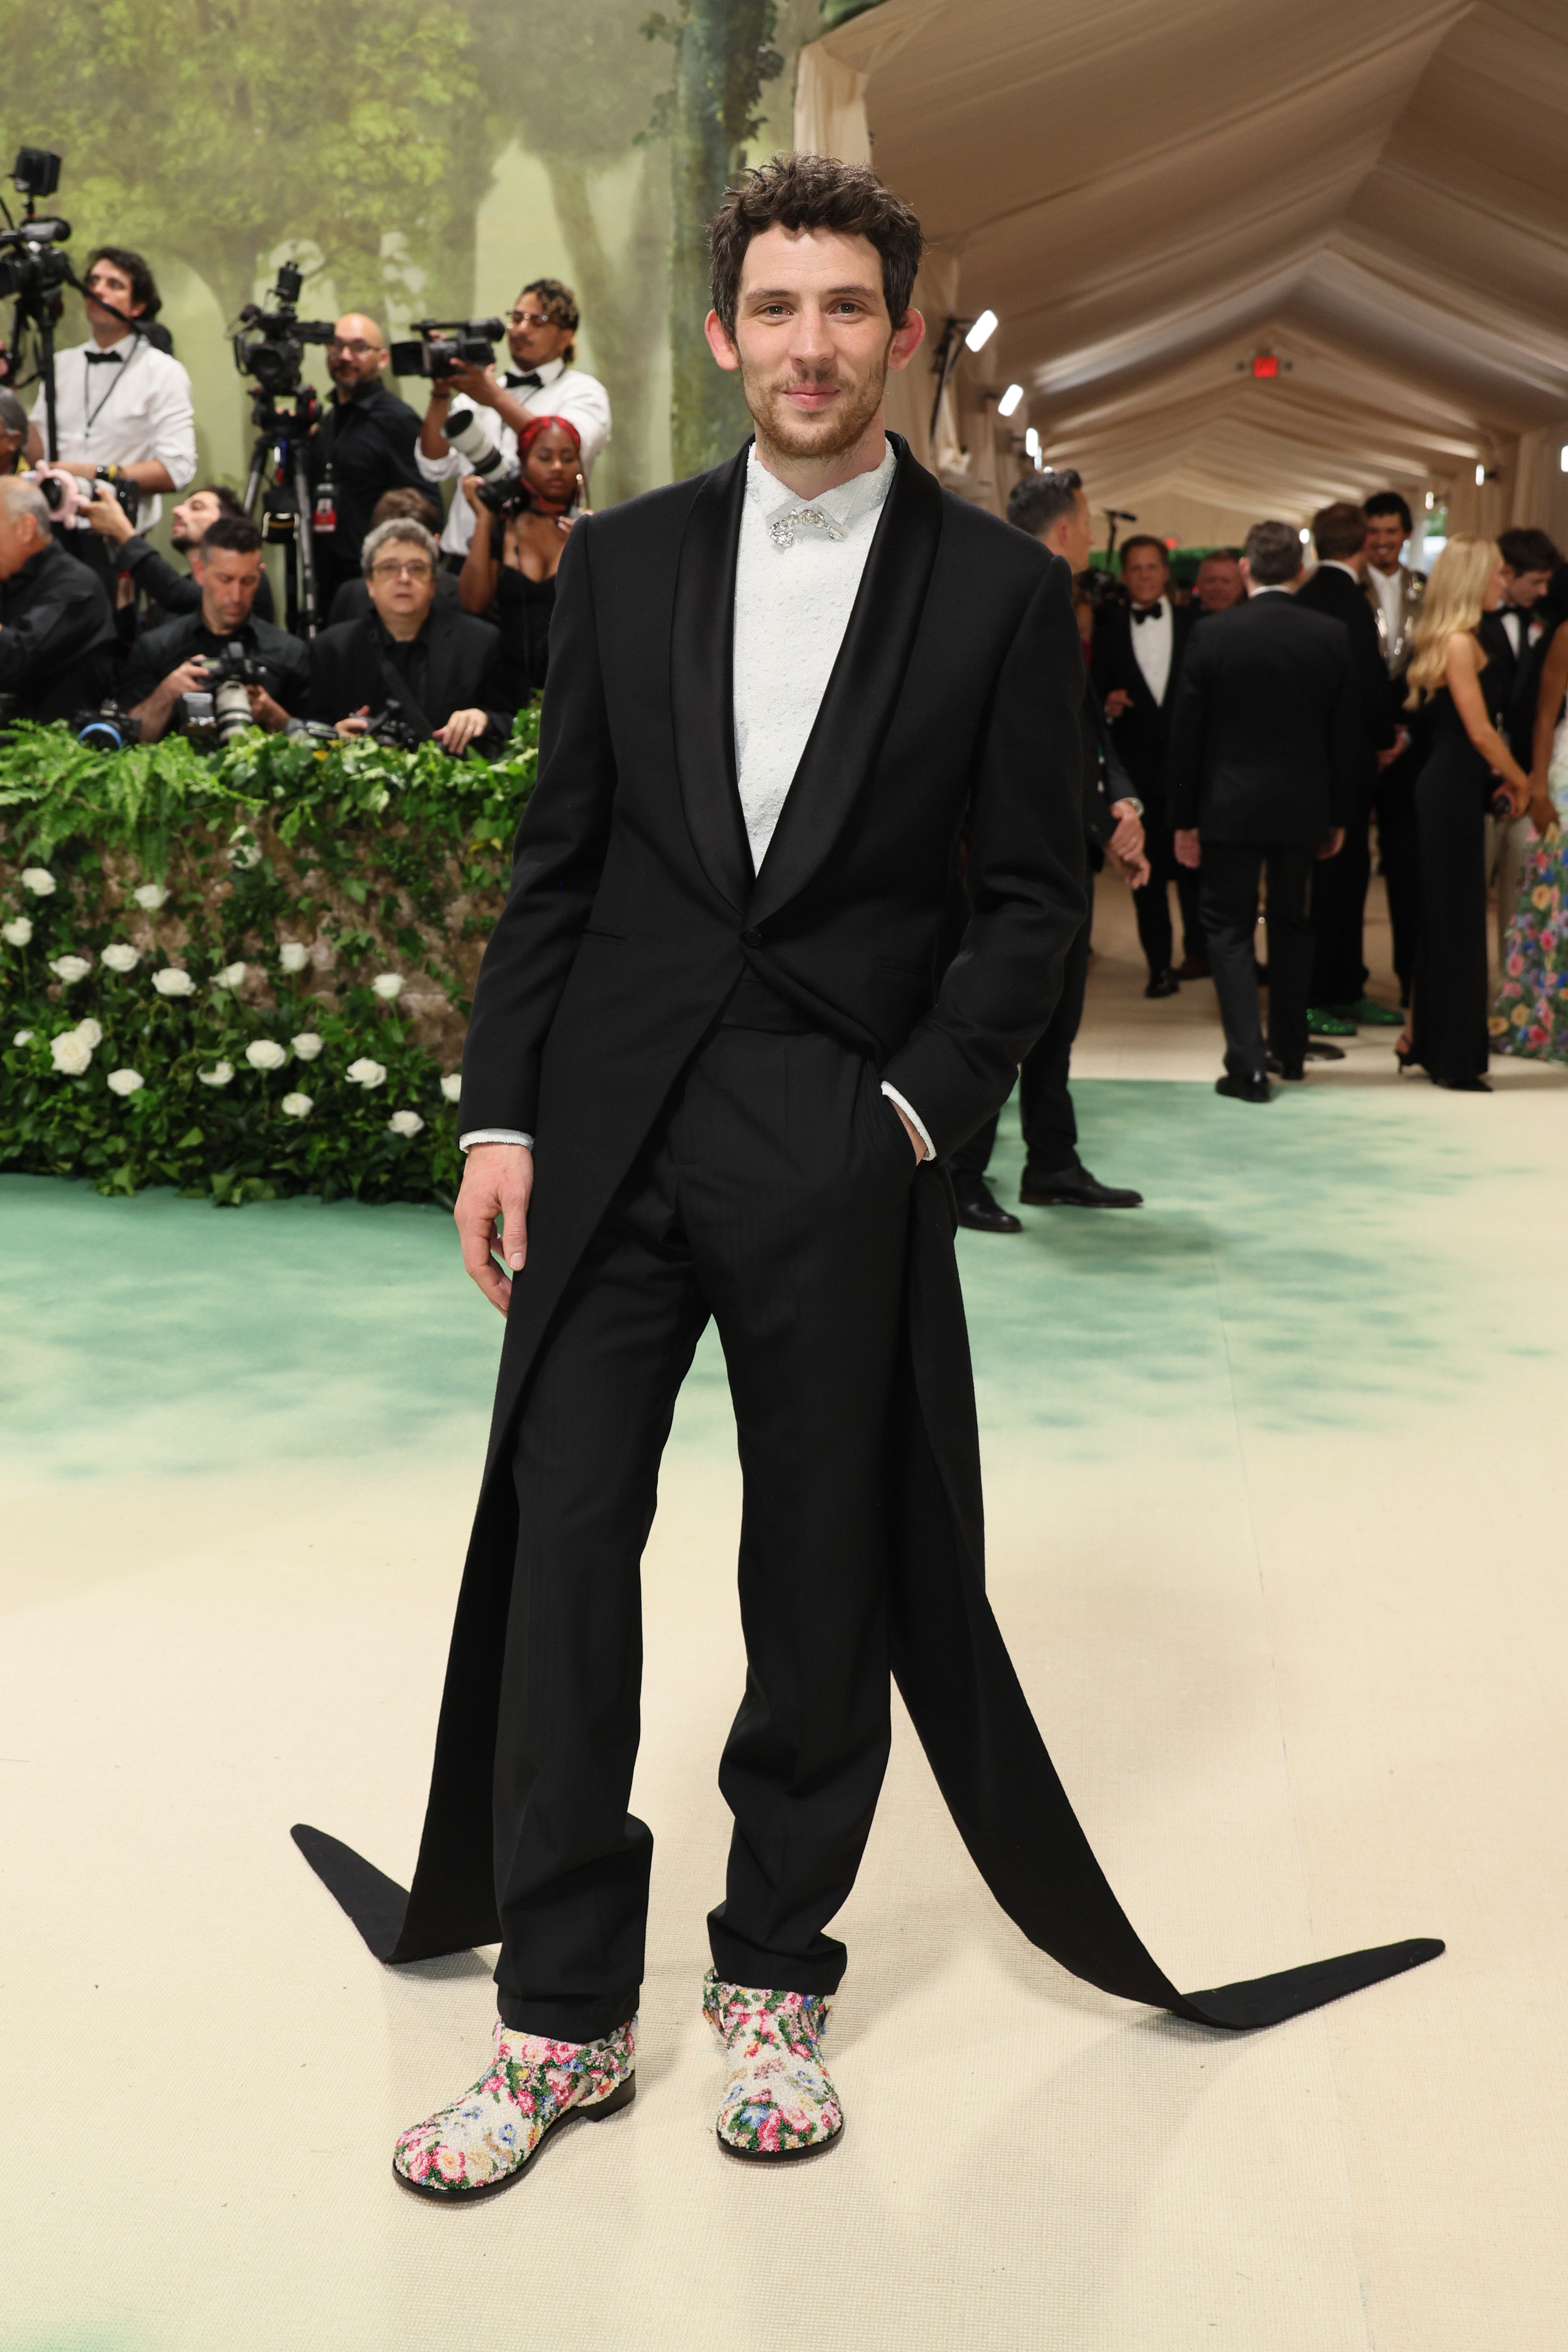 Josh O&#x27;Connor in unique black suit with long trailing ribbon and patterned shoes on event carpet